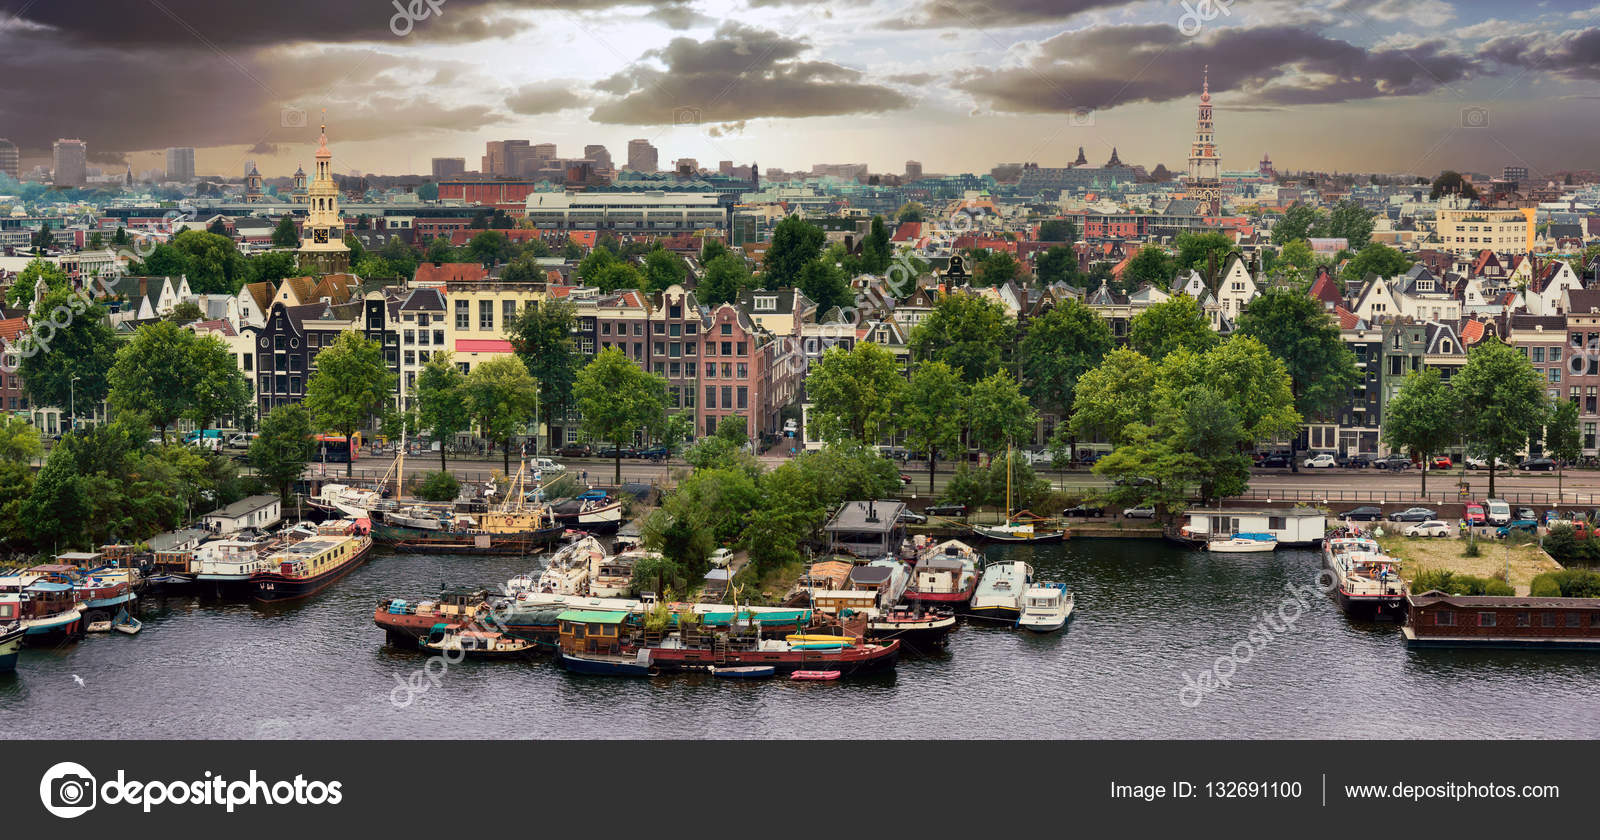 Old Amsterdam city — Stock Photo © toxawww #132691100